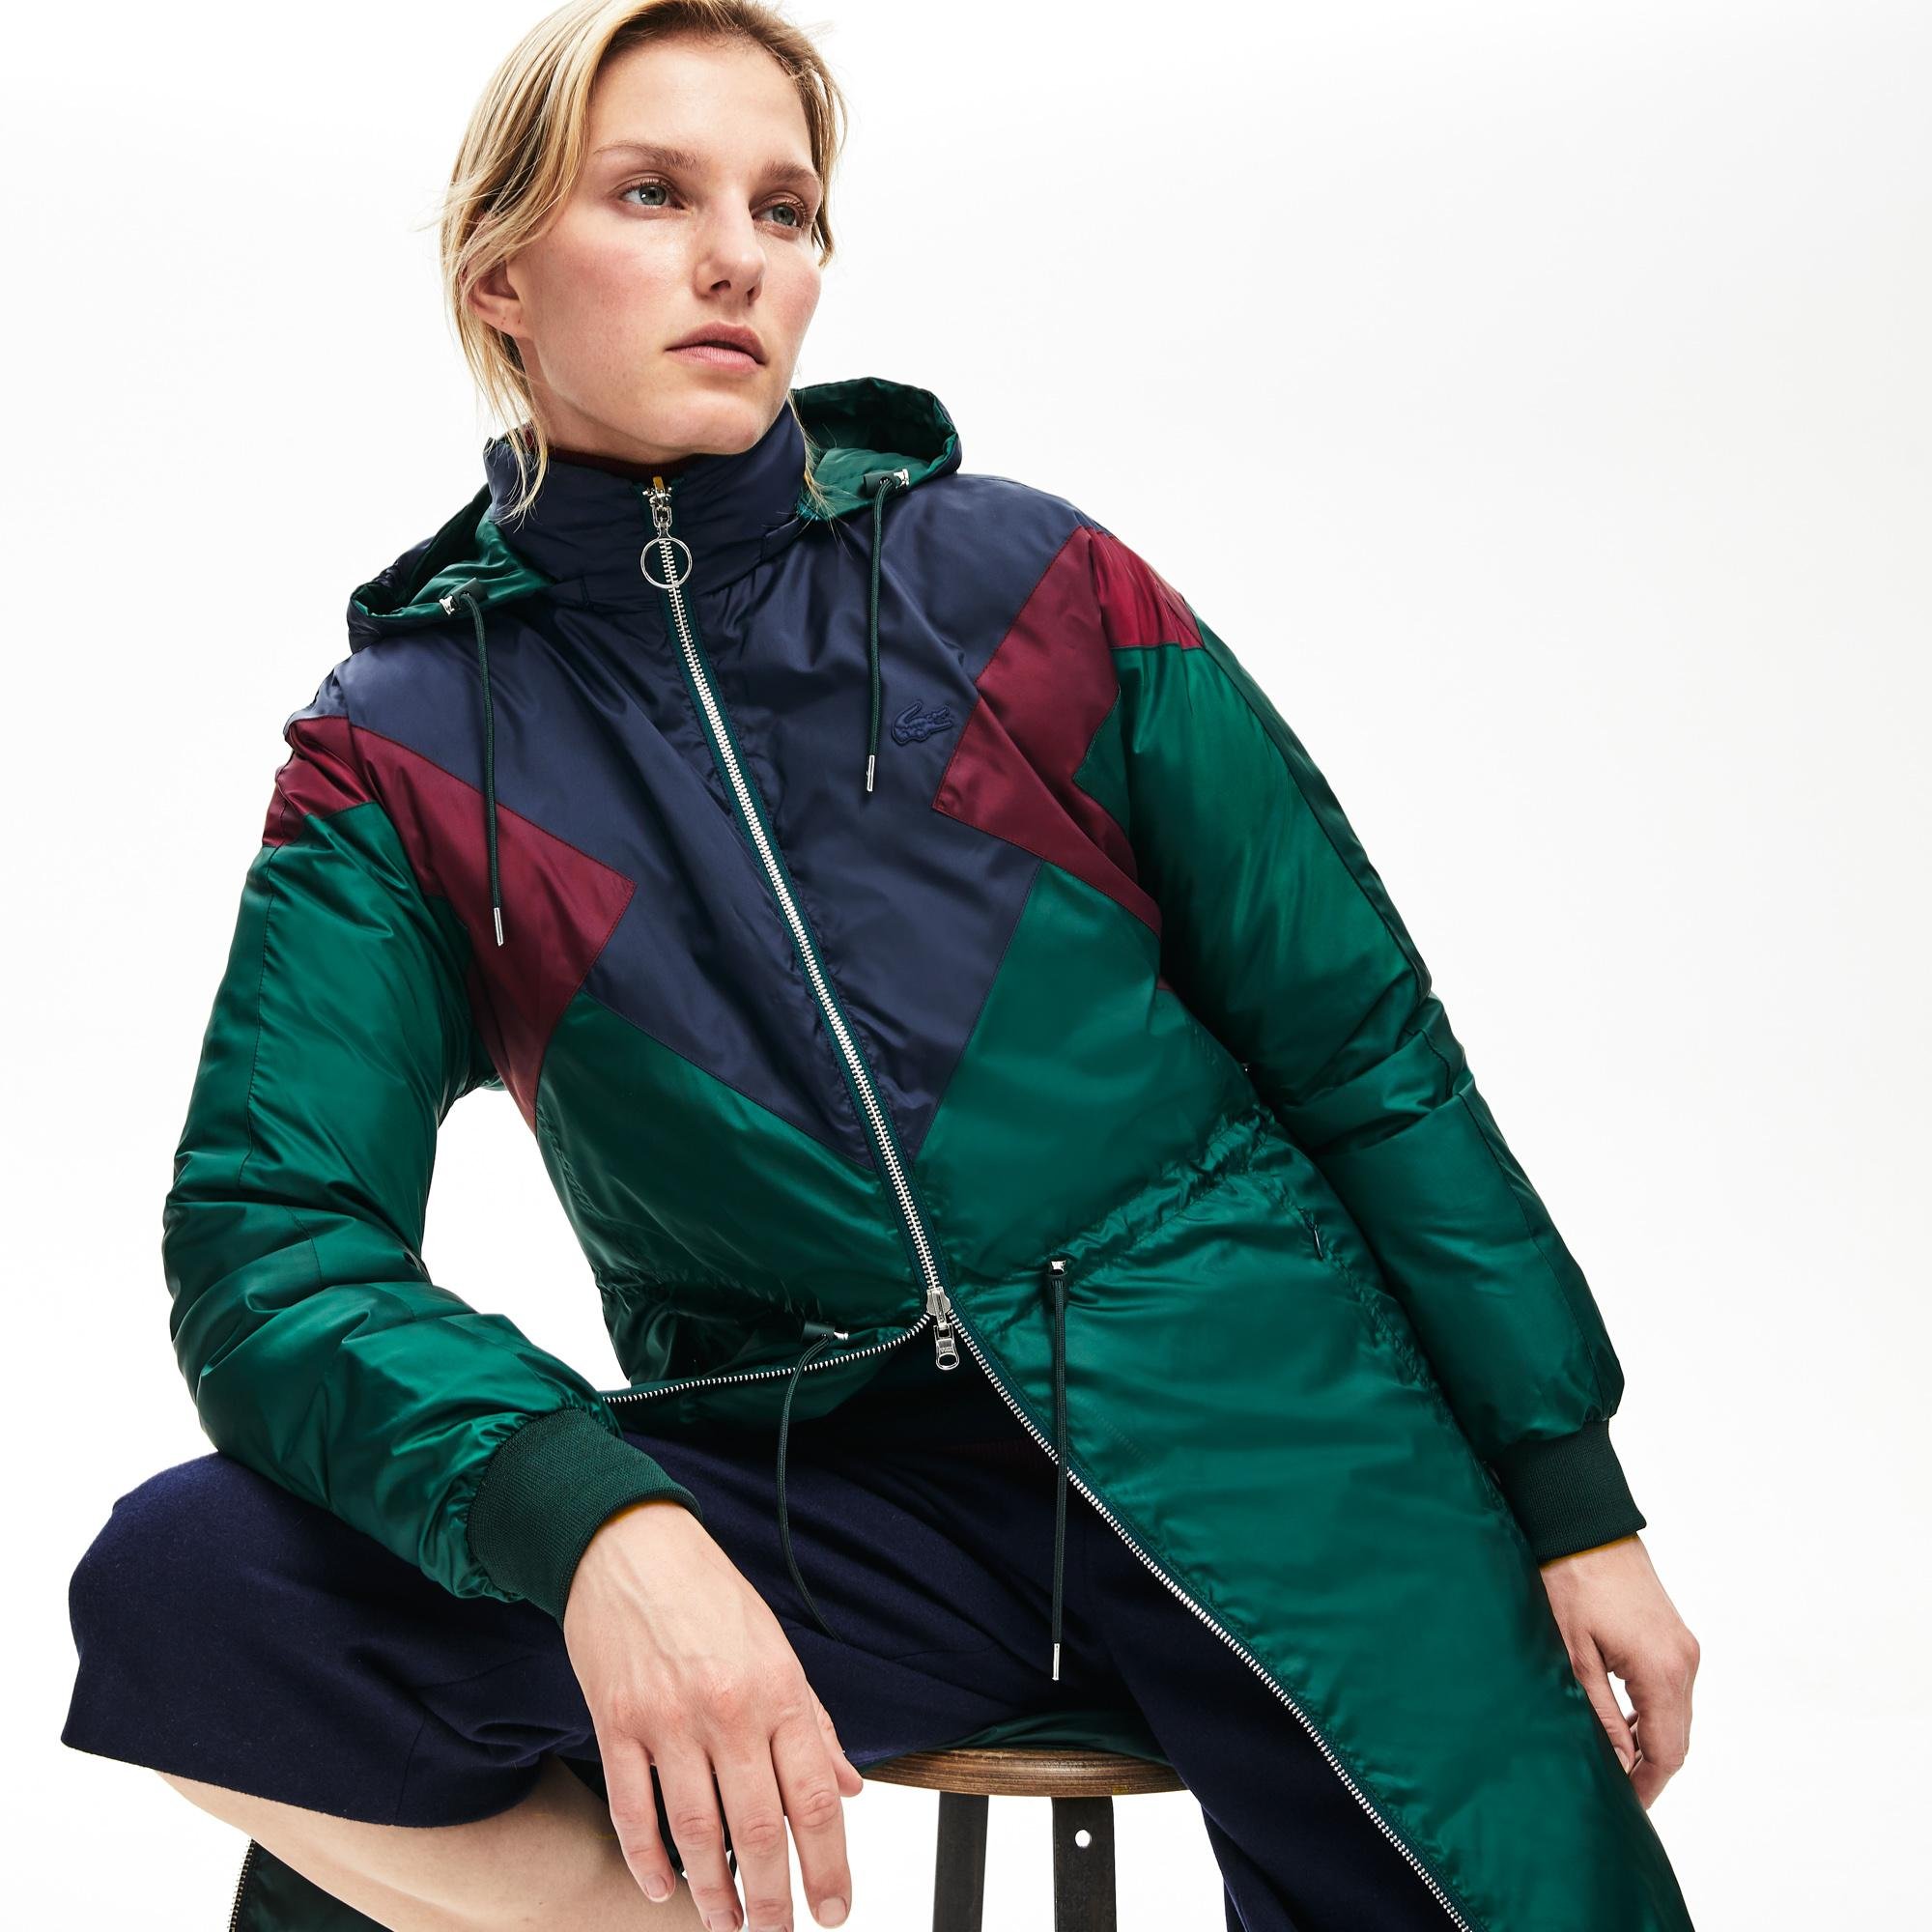 Lacoste Women's Optional Colourblock Reversible Water-Resistant Long Quilted Jacket